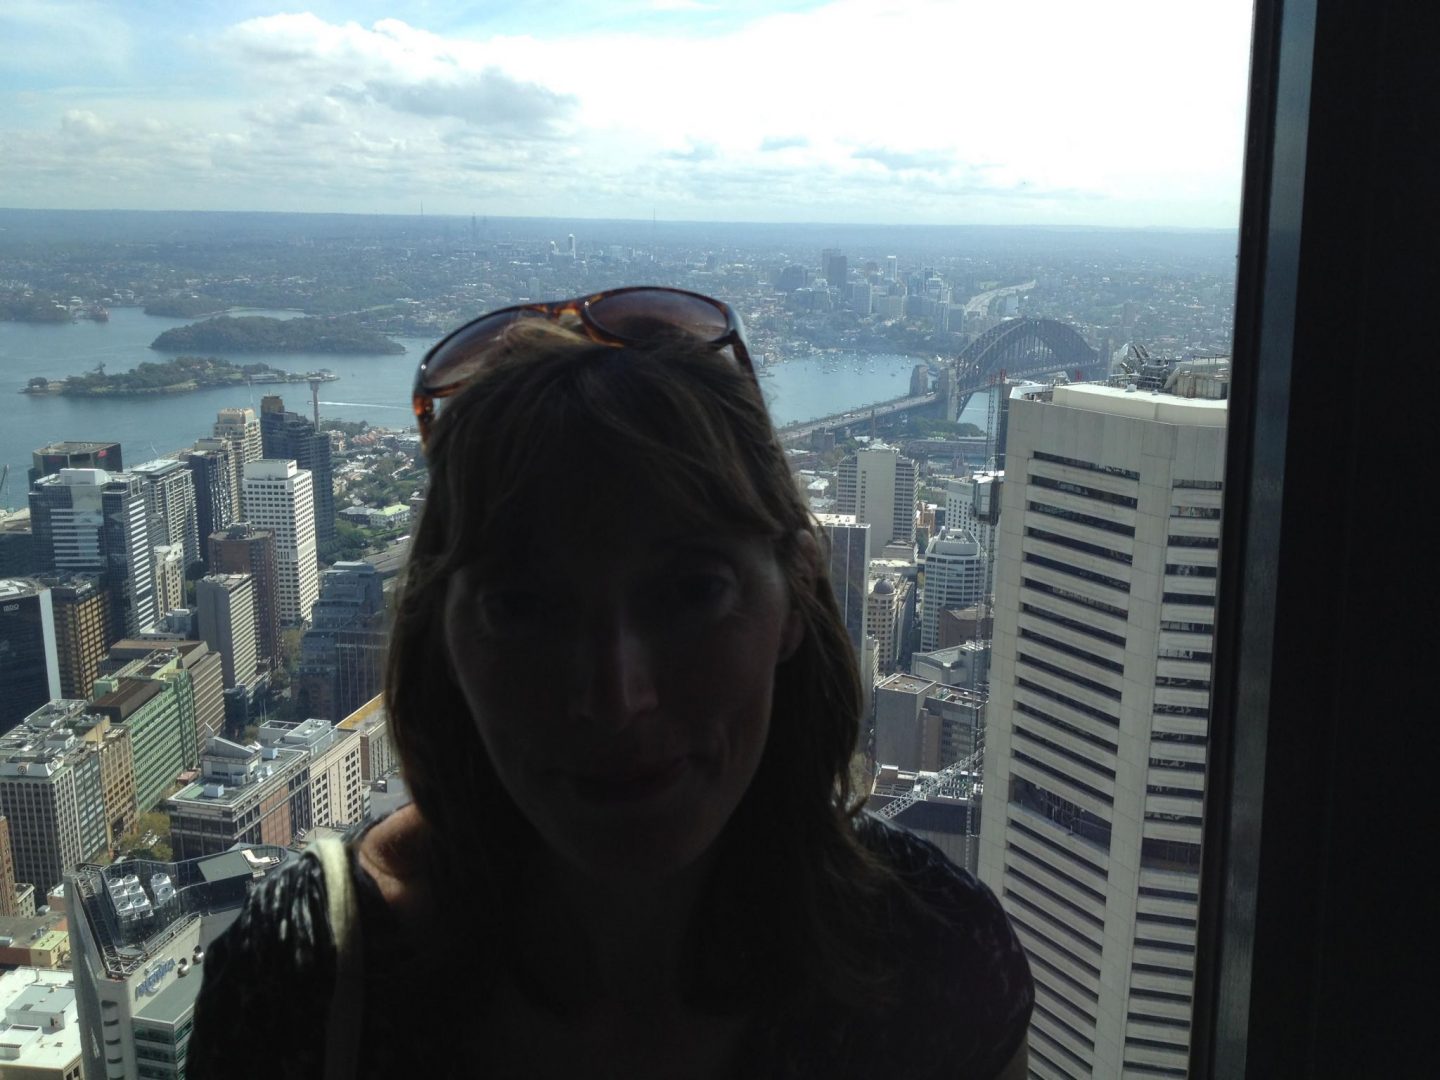 Mum in front of the view from the Sydney Tower Eye, Australia